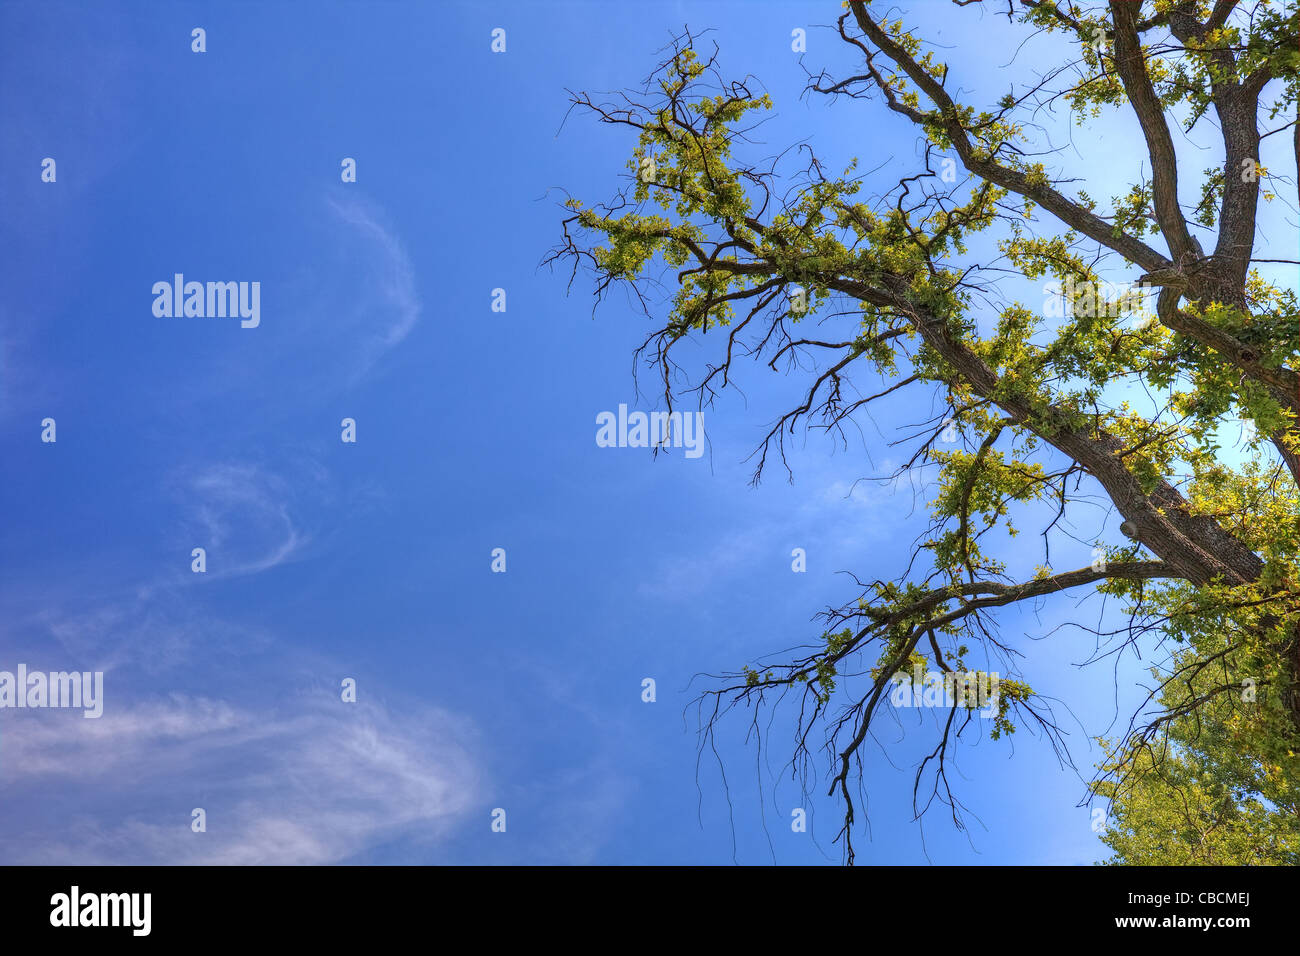 Old tree and sky as background with empty space for your design. Stock Photo